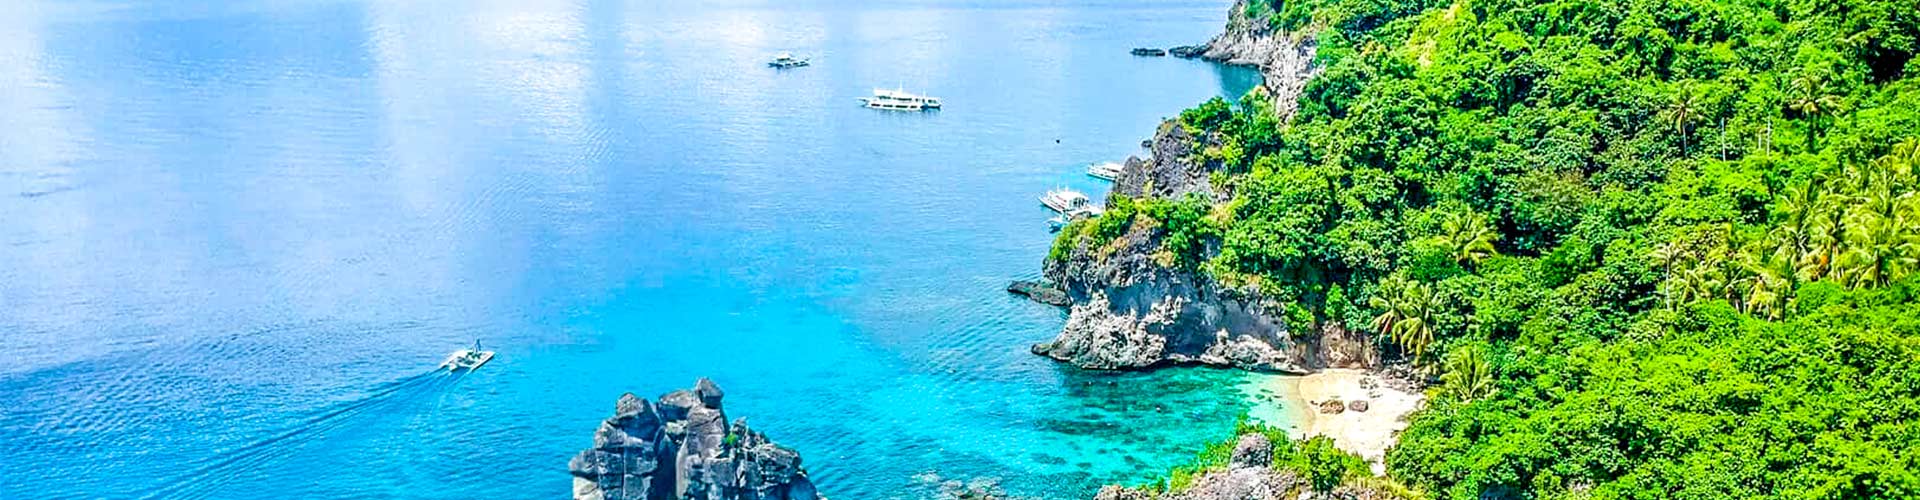 14 Days Philippines Tour to North Luzon with Bohol & Dumaguete